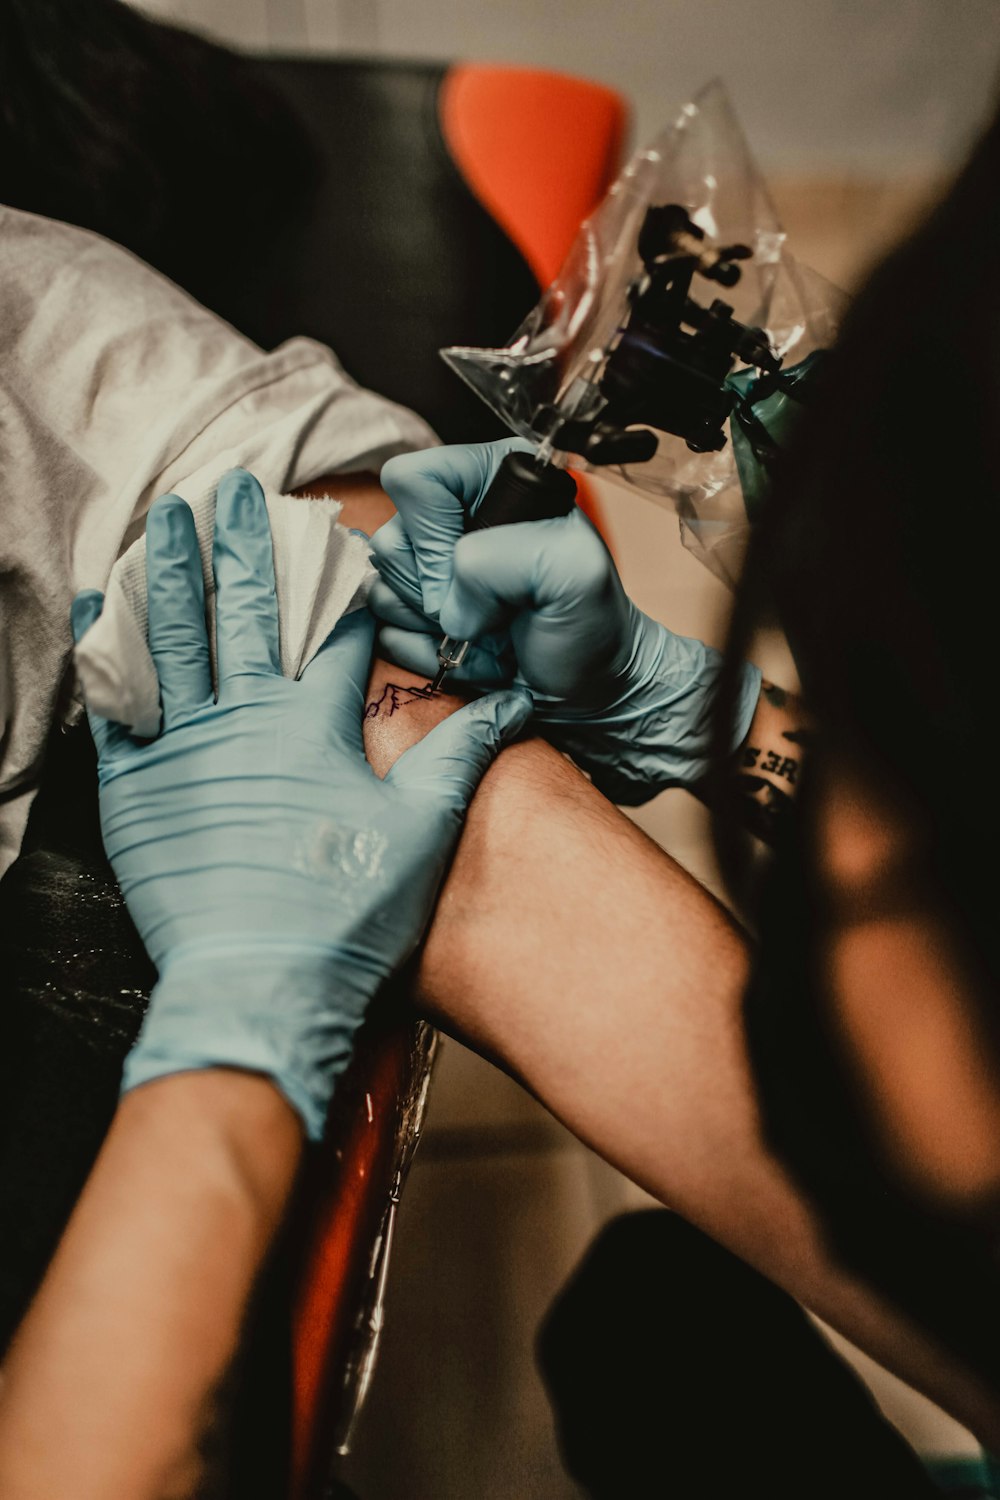 person tattooing person's arm